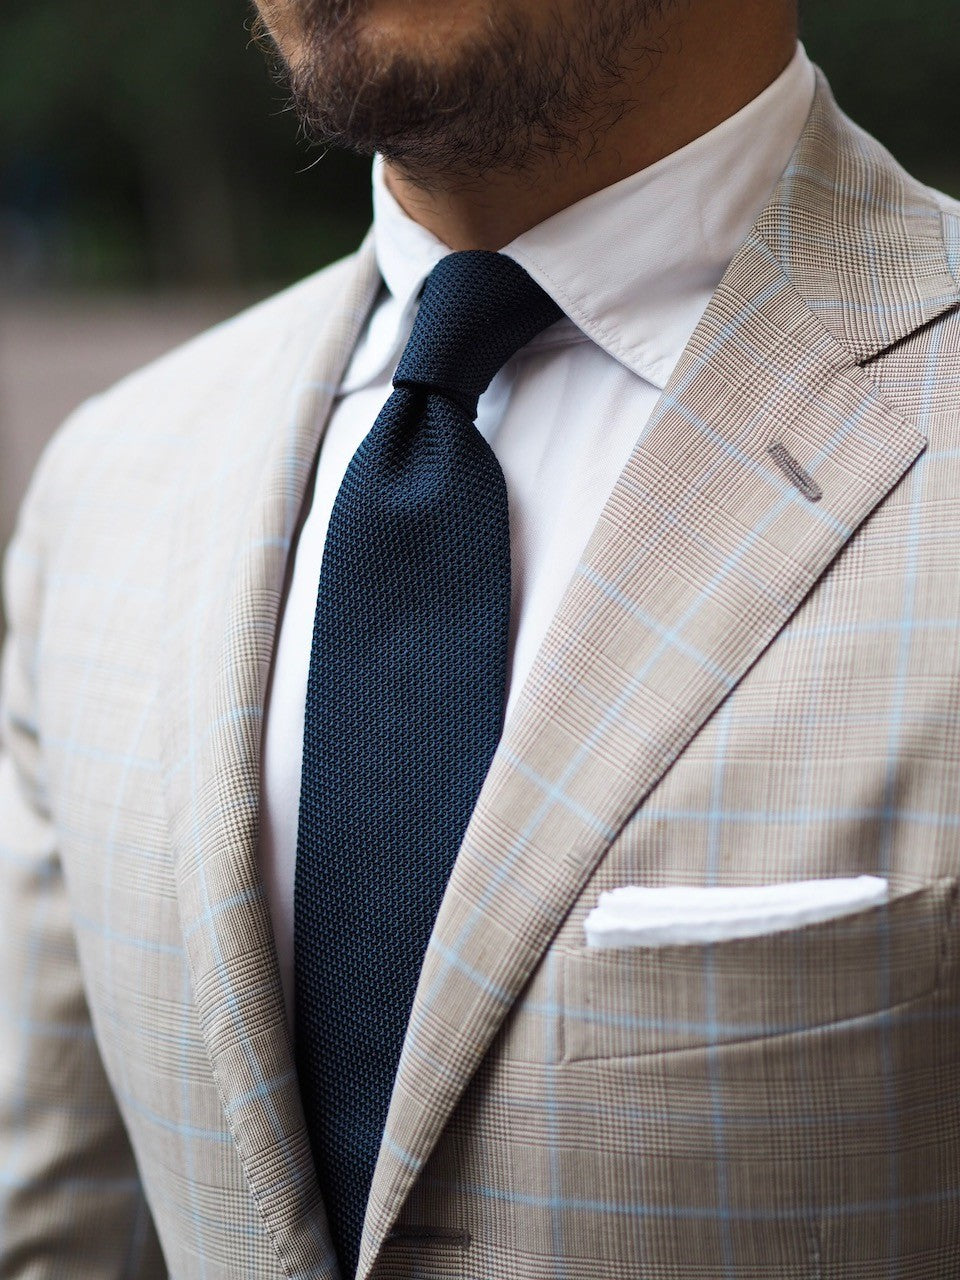 DLA navy blue grenadine tie texture with checked sport coat white shirt and white linen pocket square